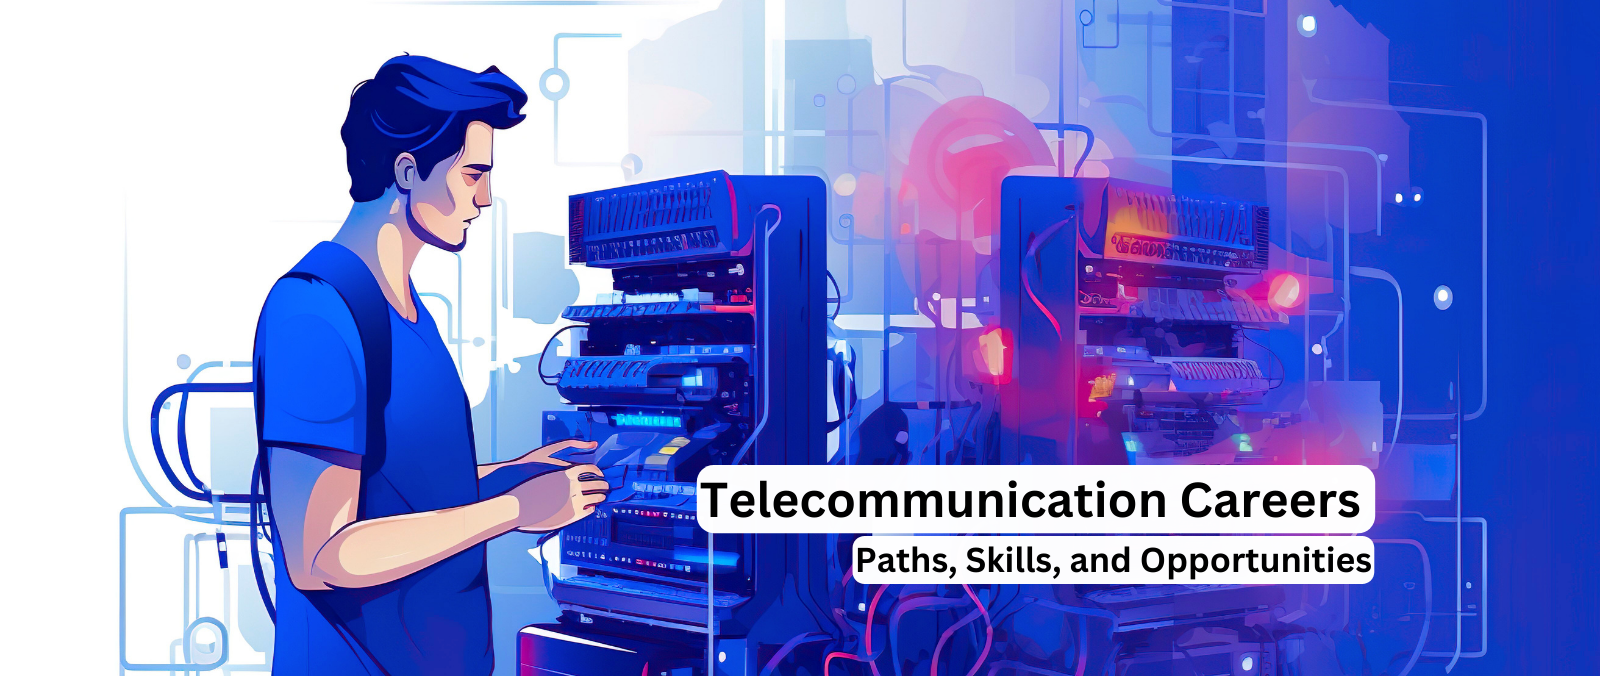 Telecommunication Careers: Paths, Skills, and Opportunities